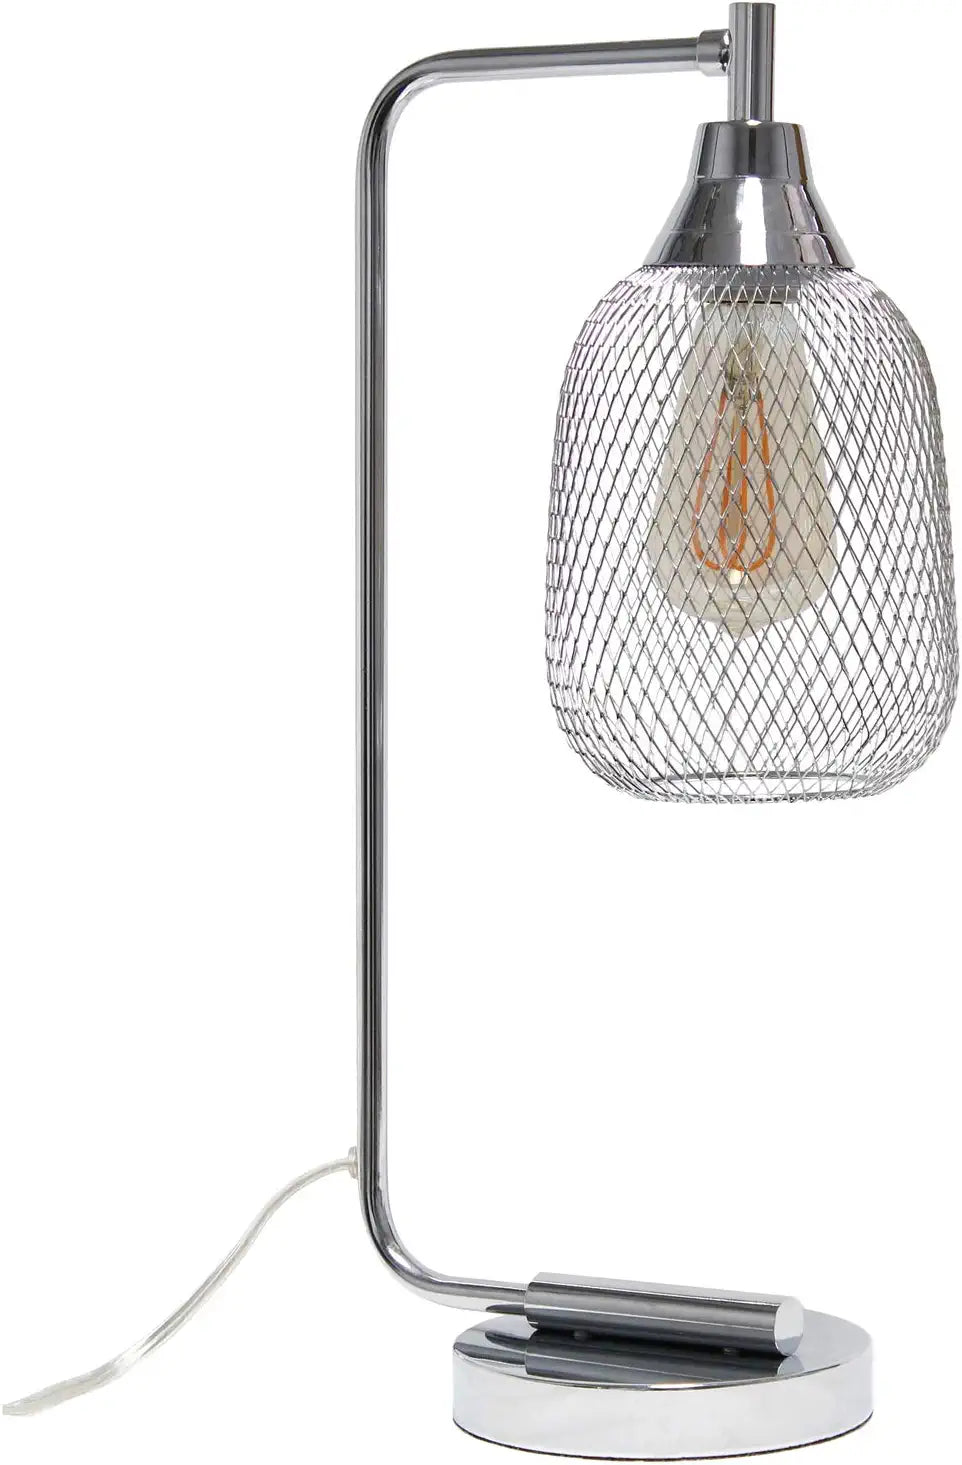 Lalia Home Industrial Office Desk Lamp with Wired Mesh Shade and Polished Chrome Finish